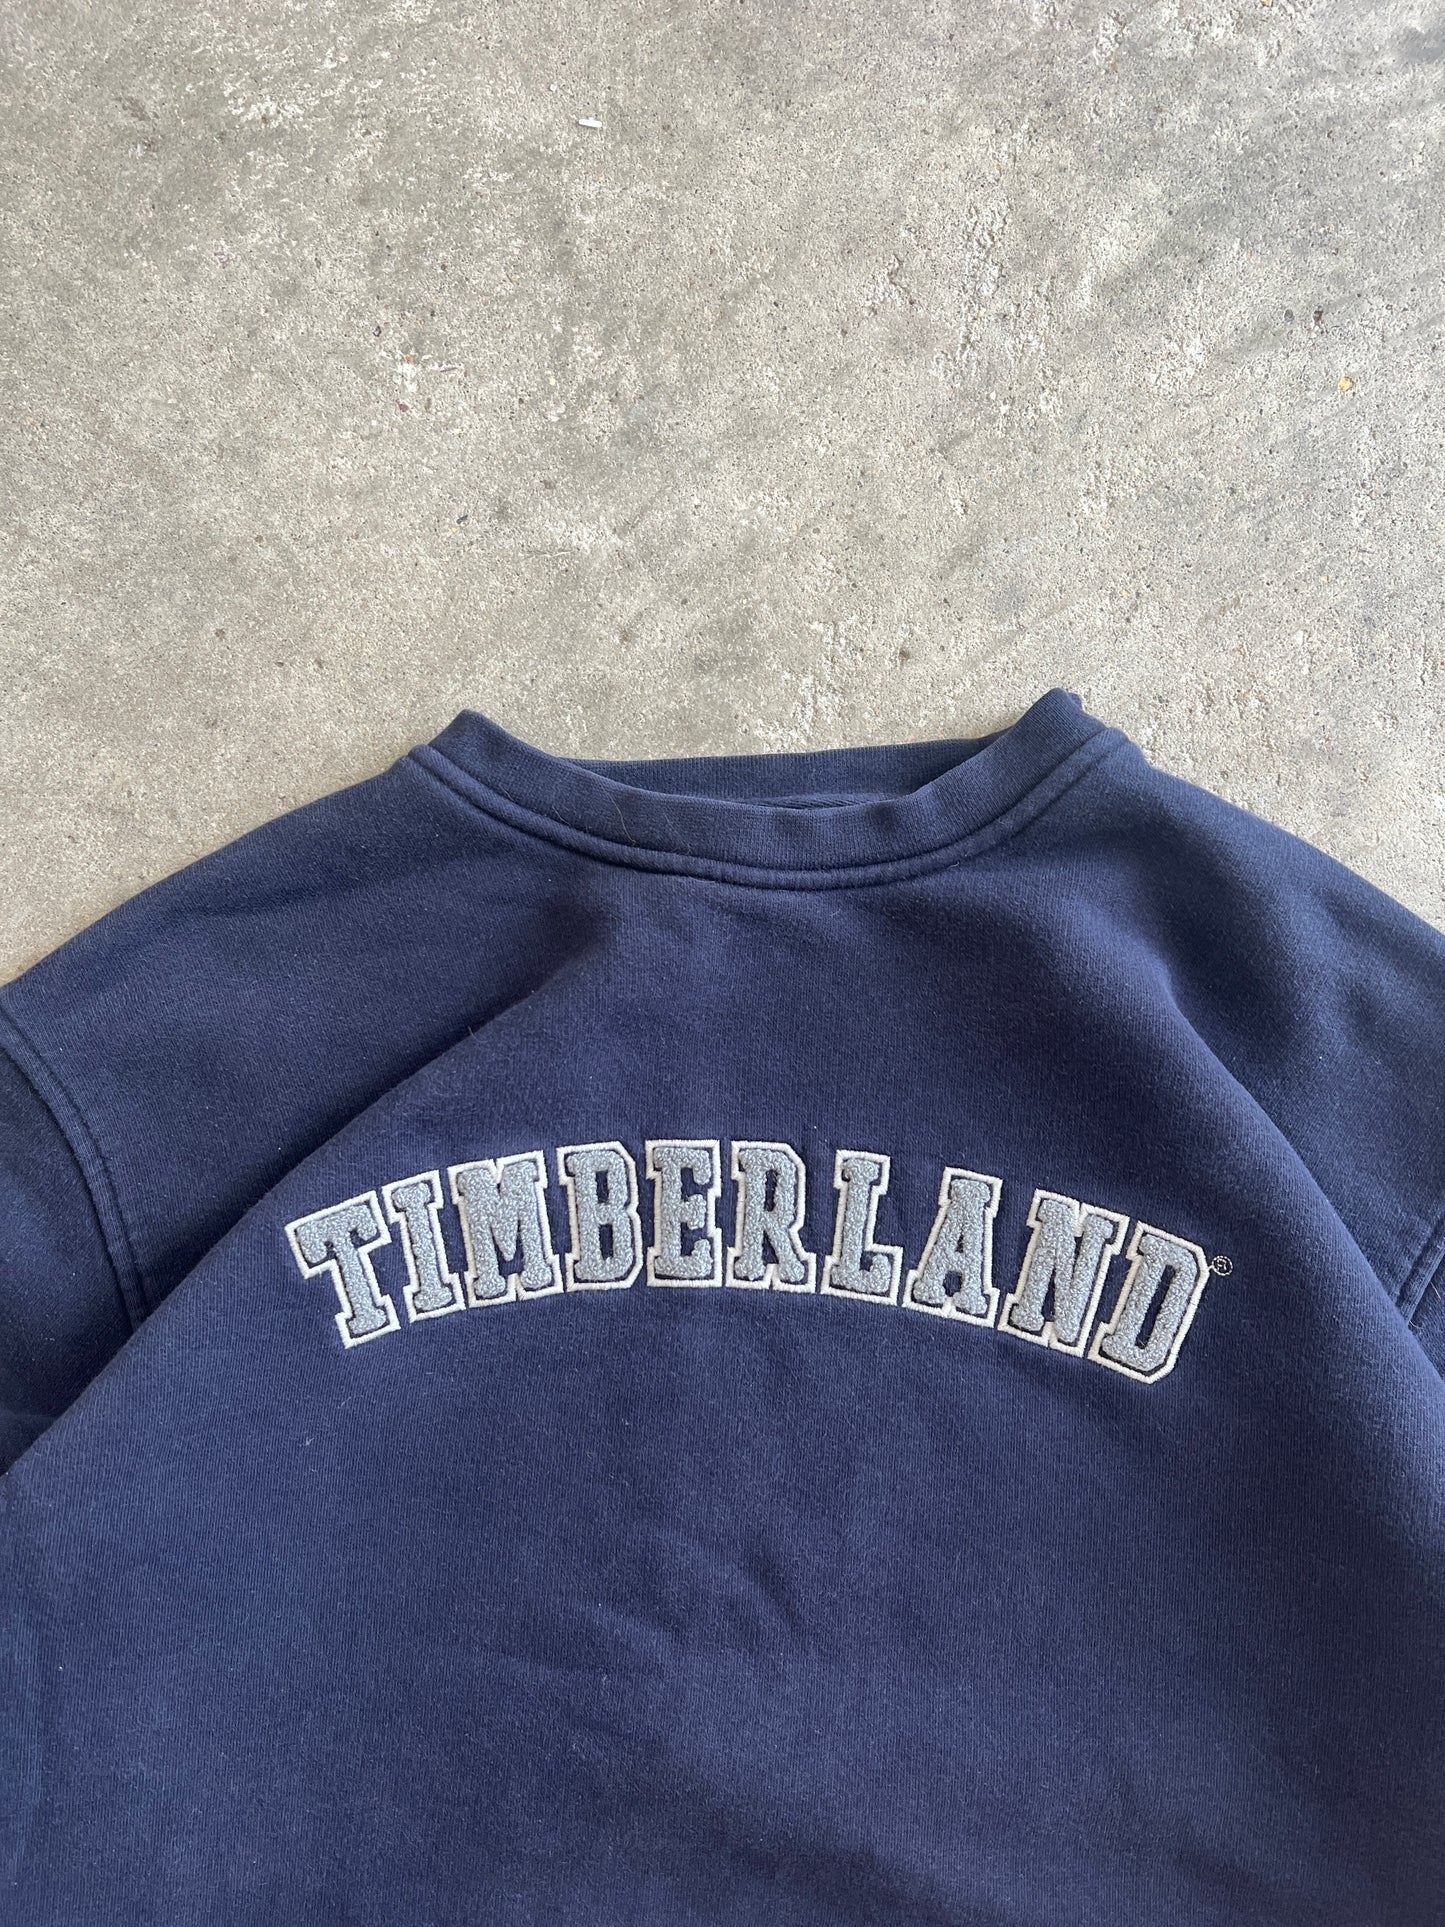 Vintage Timberland Spell Out Crew -